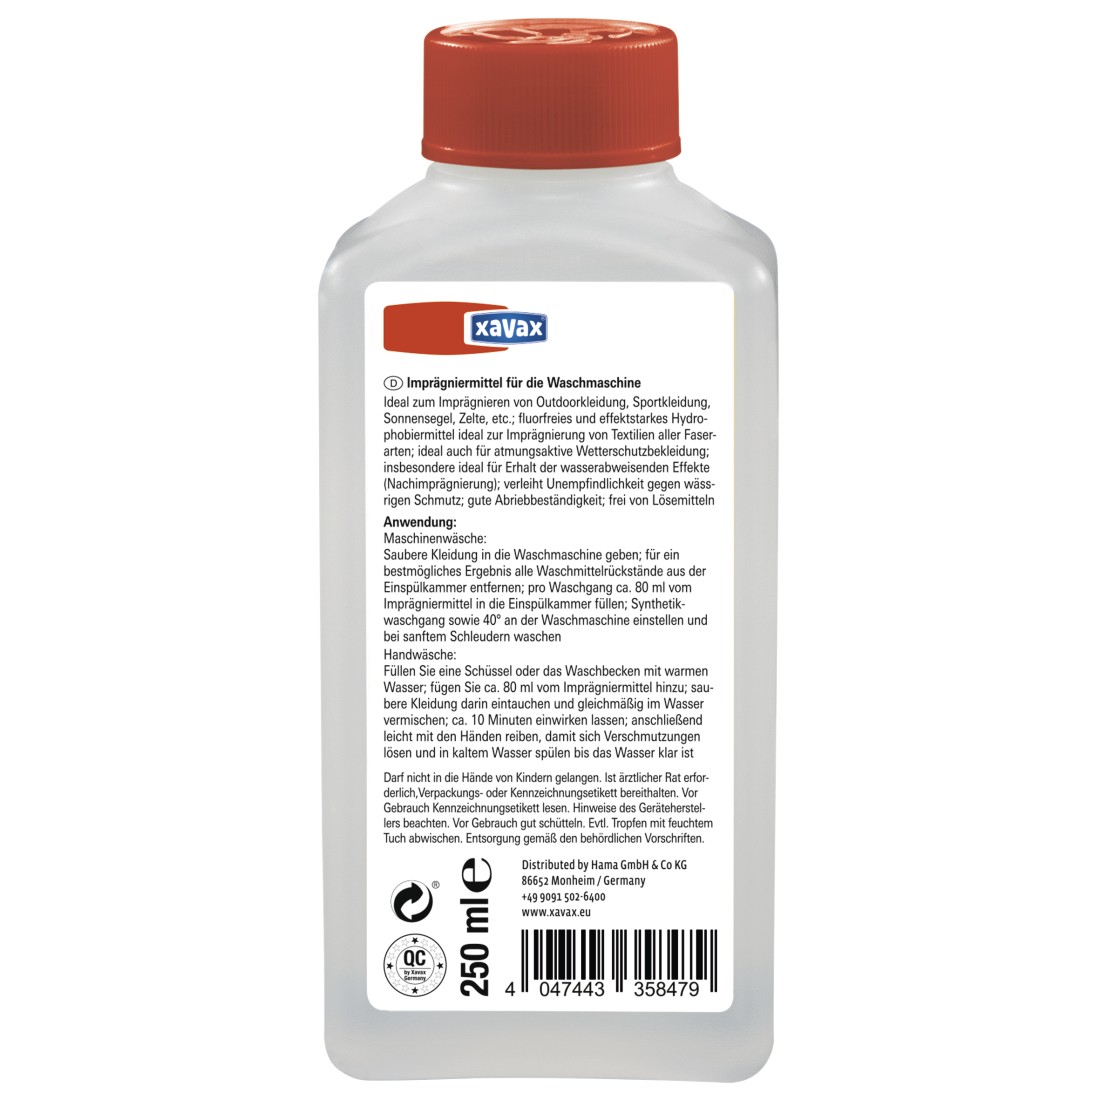 abx2 High-Res Image 2 - Xavax, Impregnating agent for washing machines, 250 ml